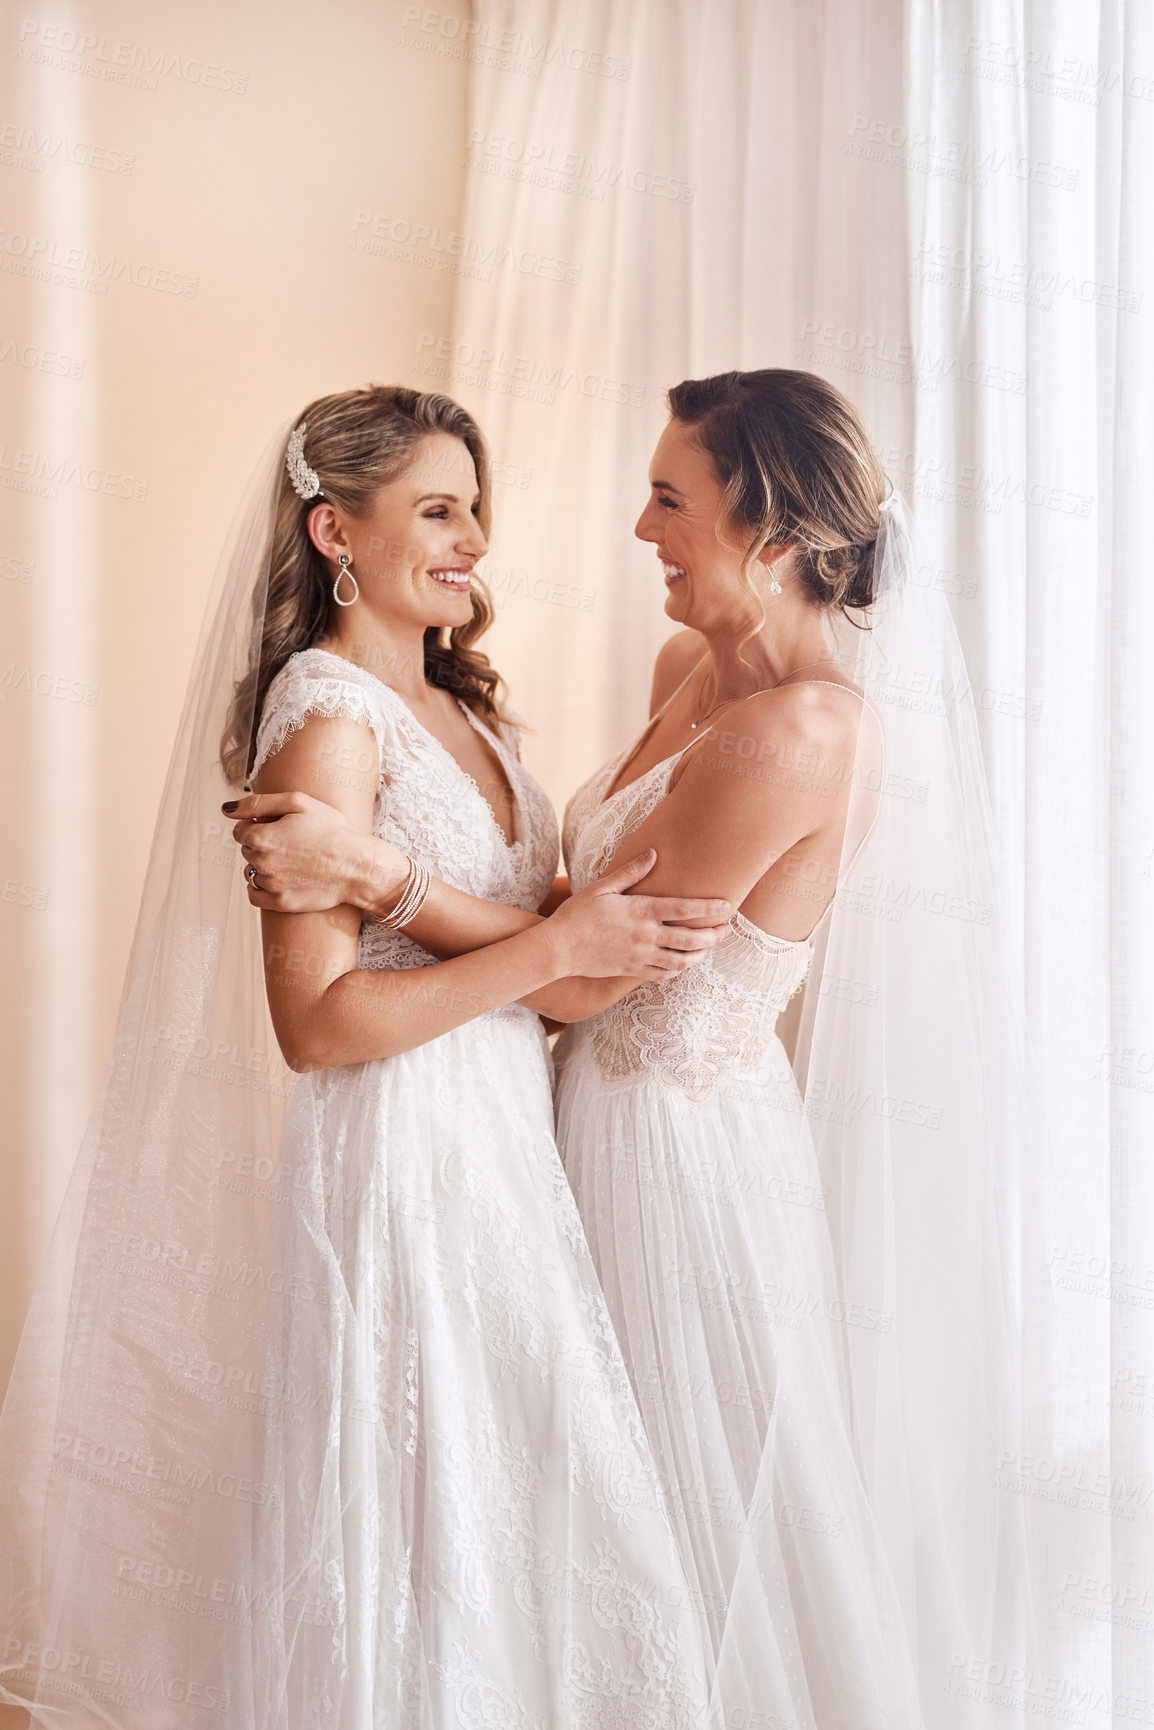 Buy stock photo Cropped shot of two attractive young brides holding each other in excitement before their wedding